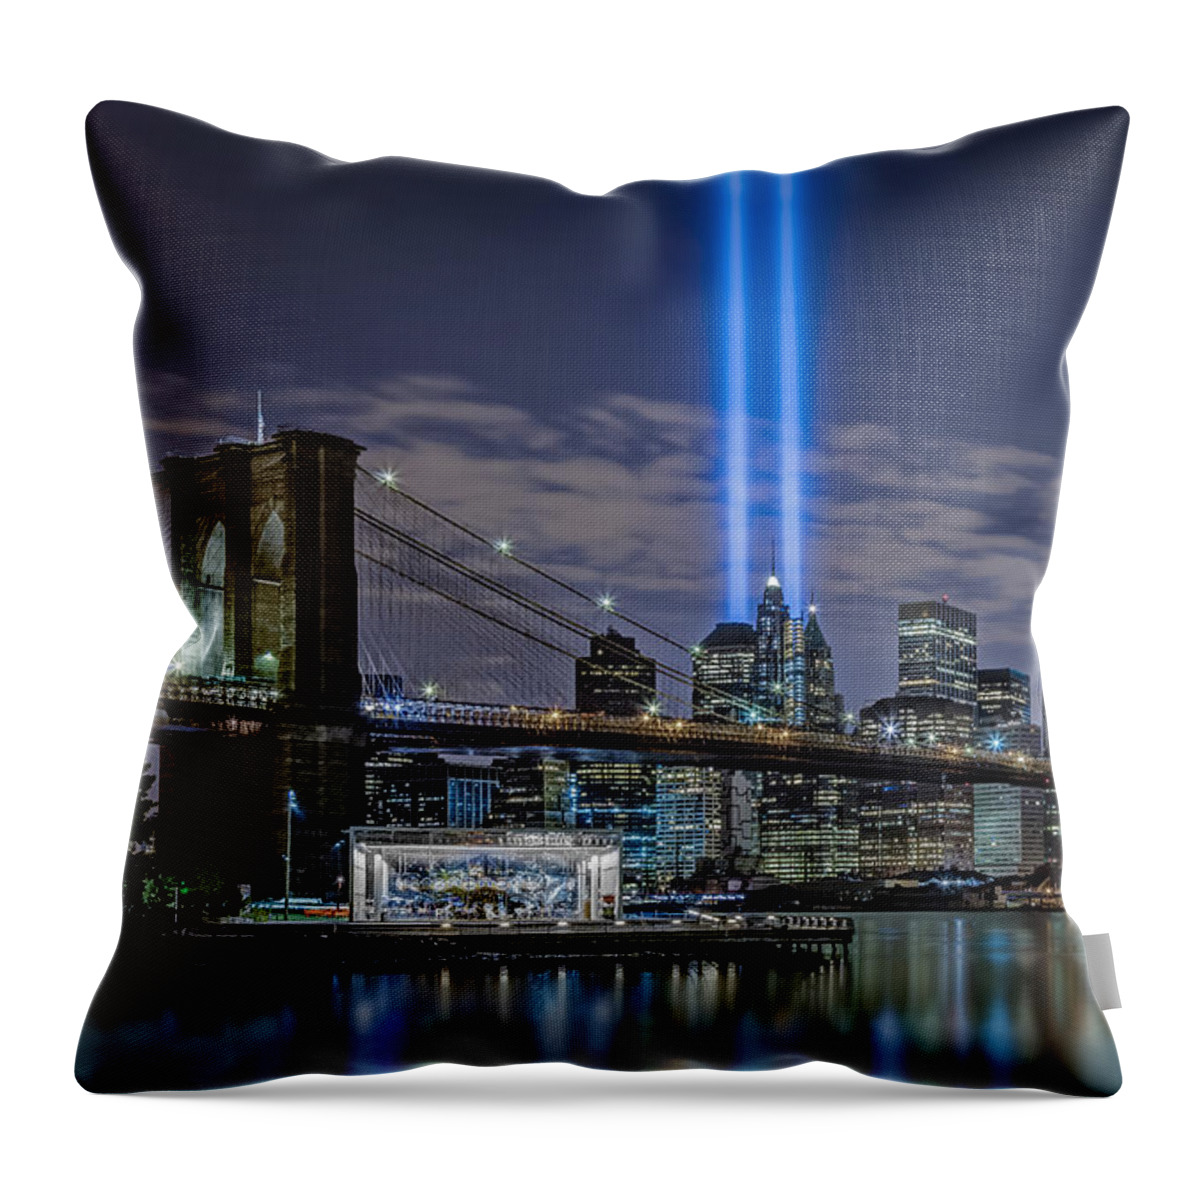 Wtc Throw Pillow featuring the photograph Brooklyn Bridge 911 Tribute by Susan Candelario